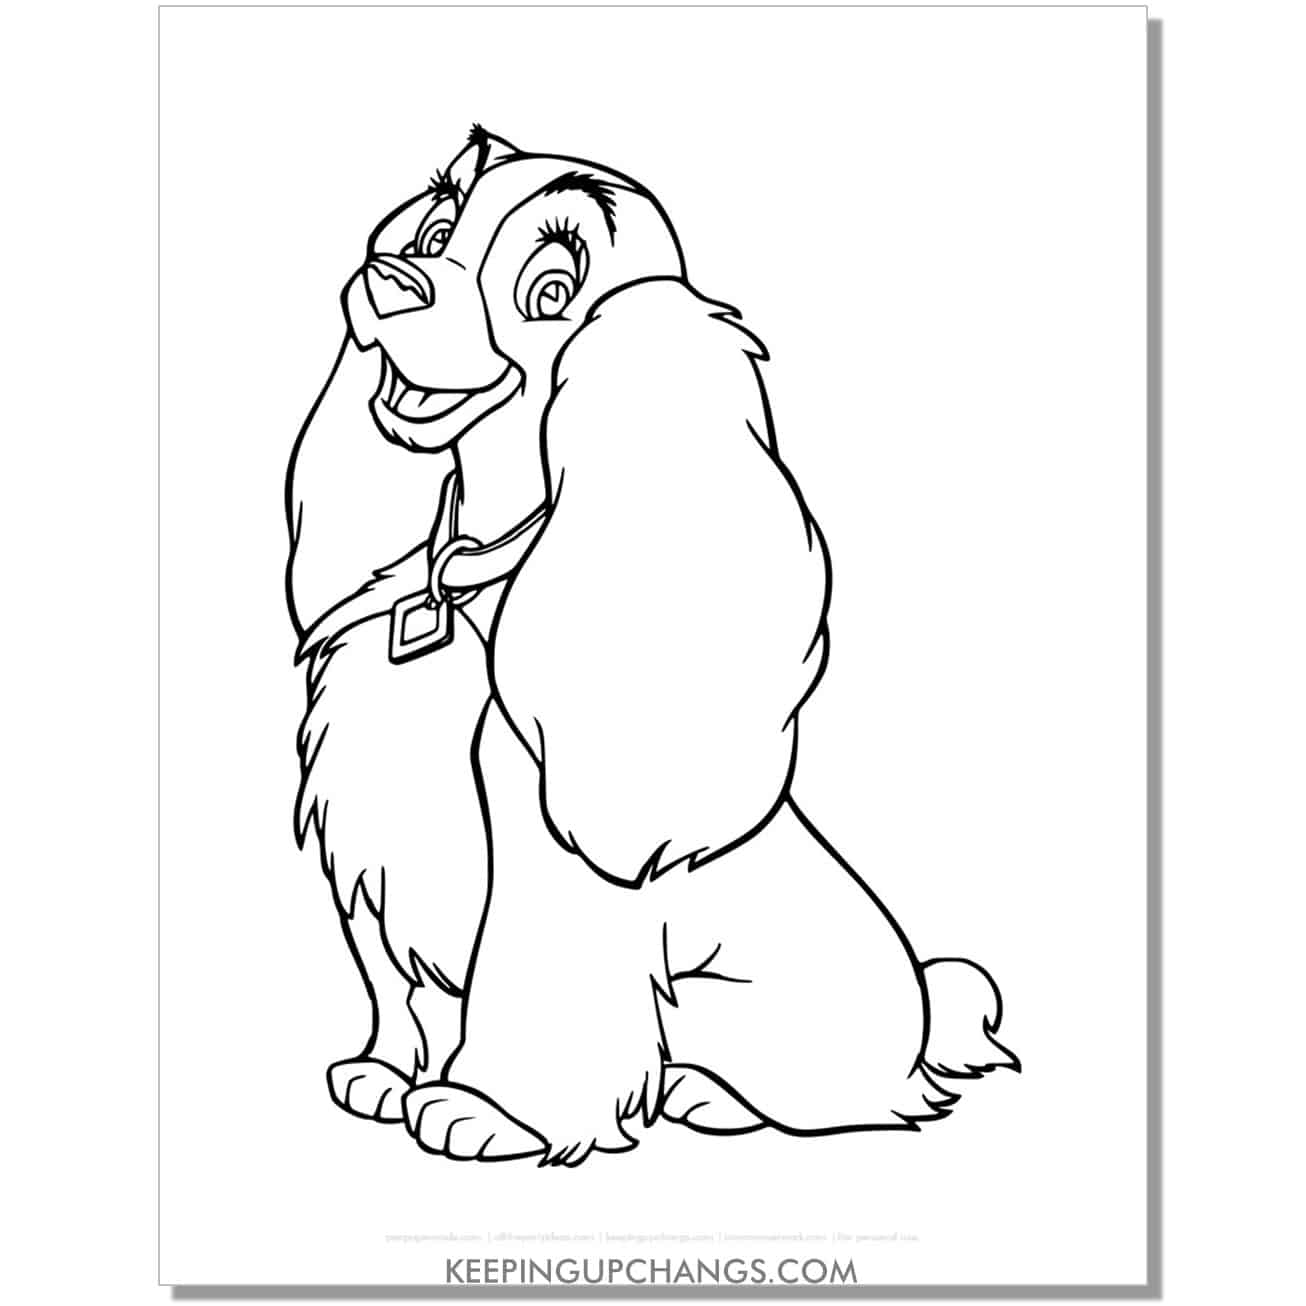 free lady sitting down from lady and the tramp coloring page, sheet.